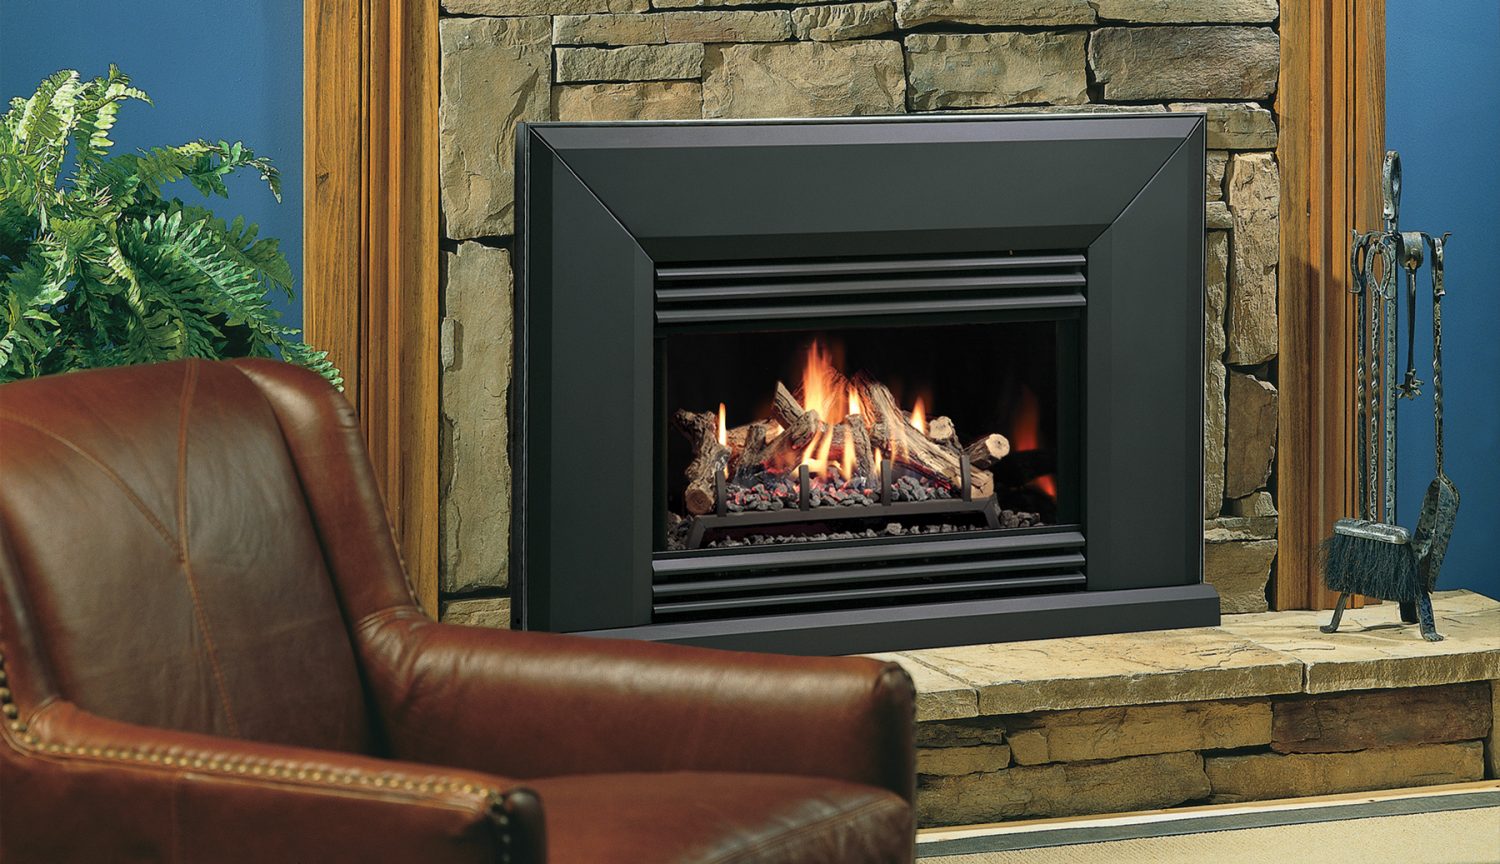 kingsman-gas-fireplace-inserts-reviews-fireplace-guide-by-linda